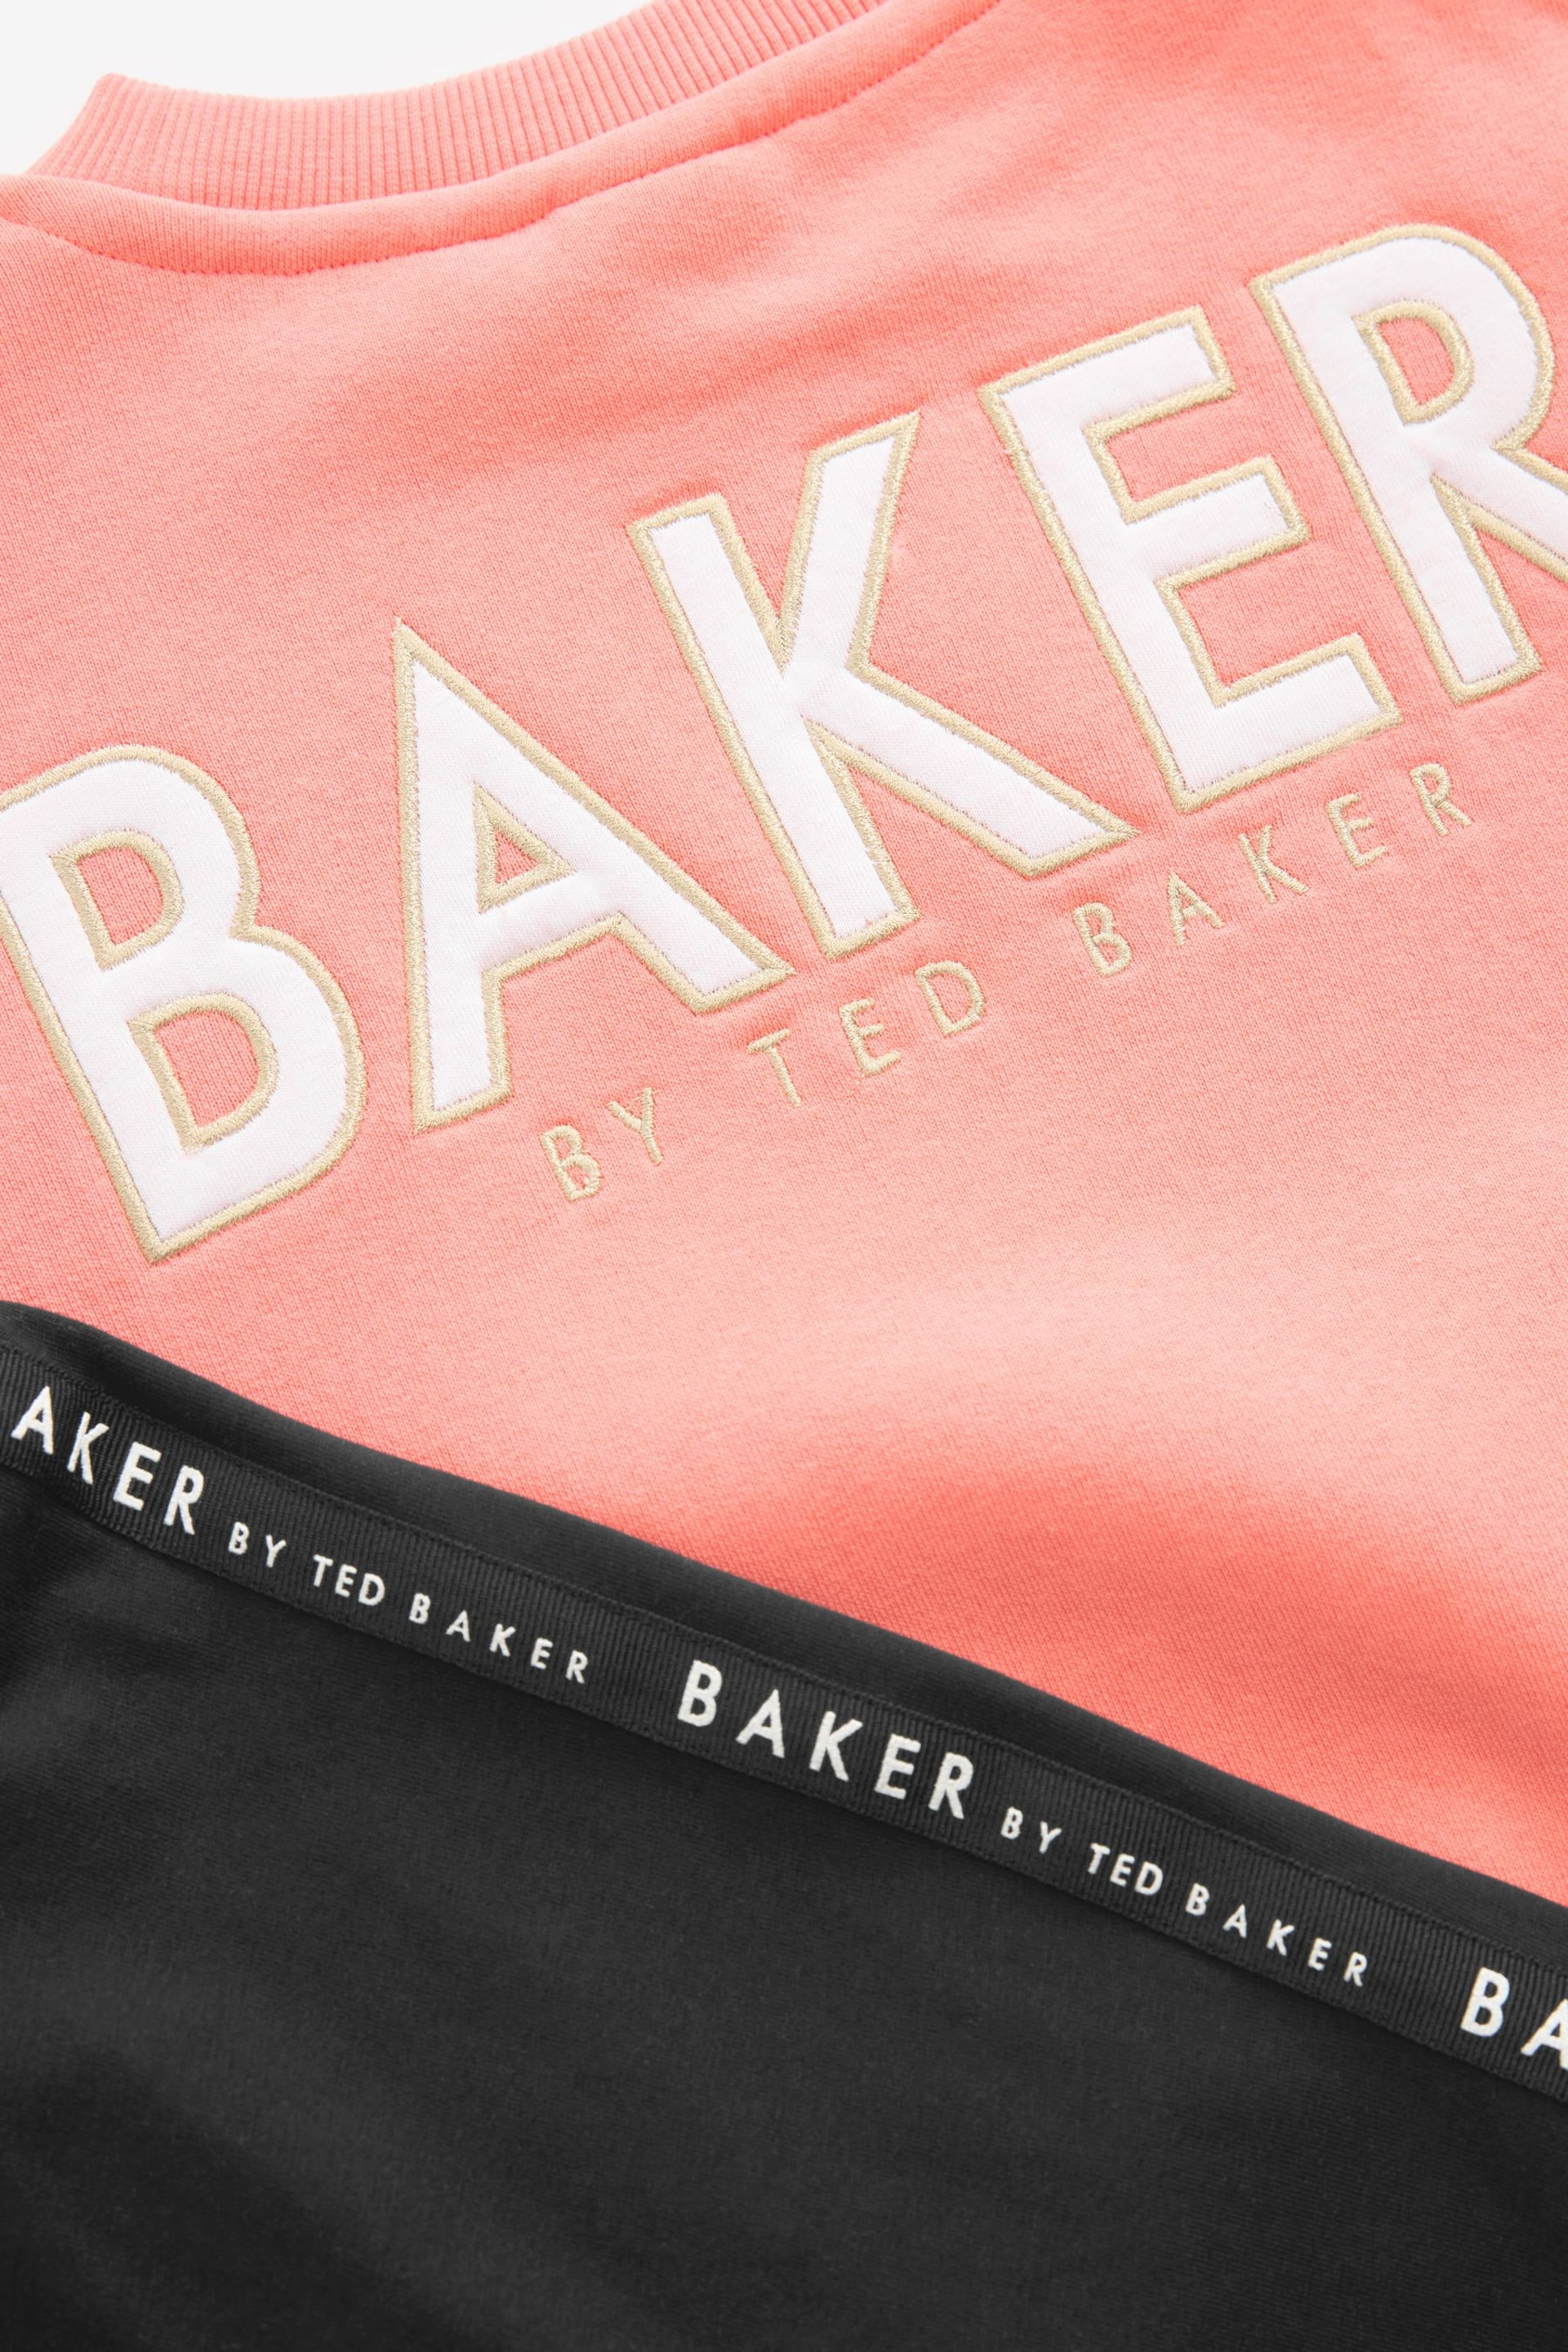 Baker by Ted Baker Apricot Sweater And Cycling Shorts Set - Image 9 of 10